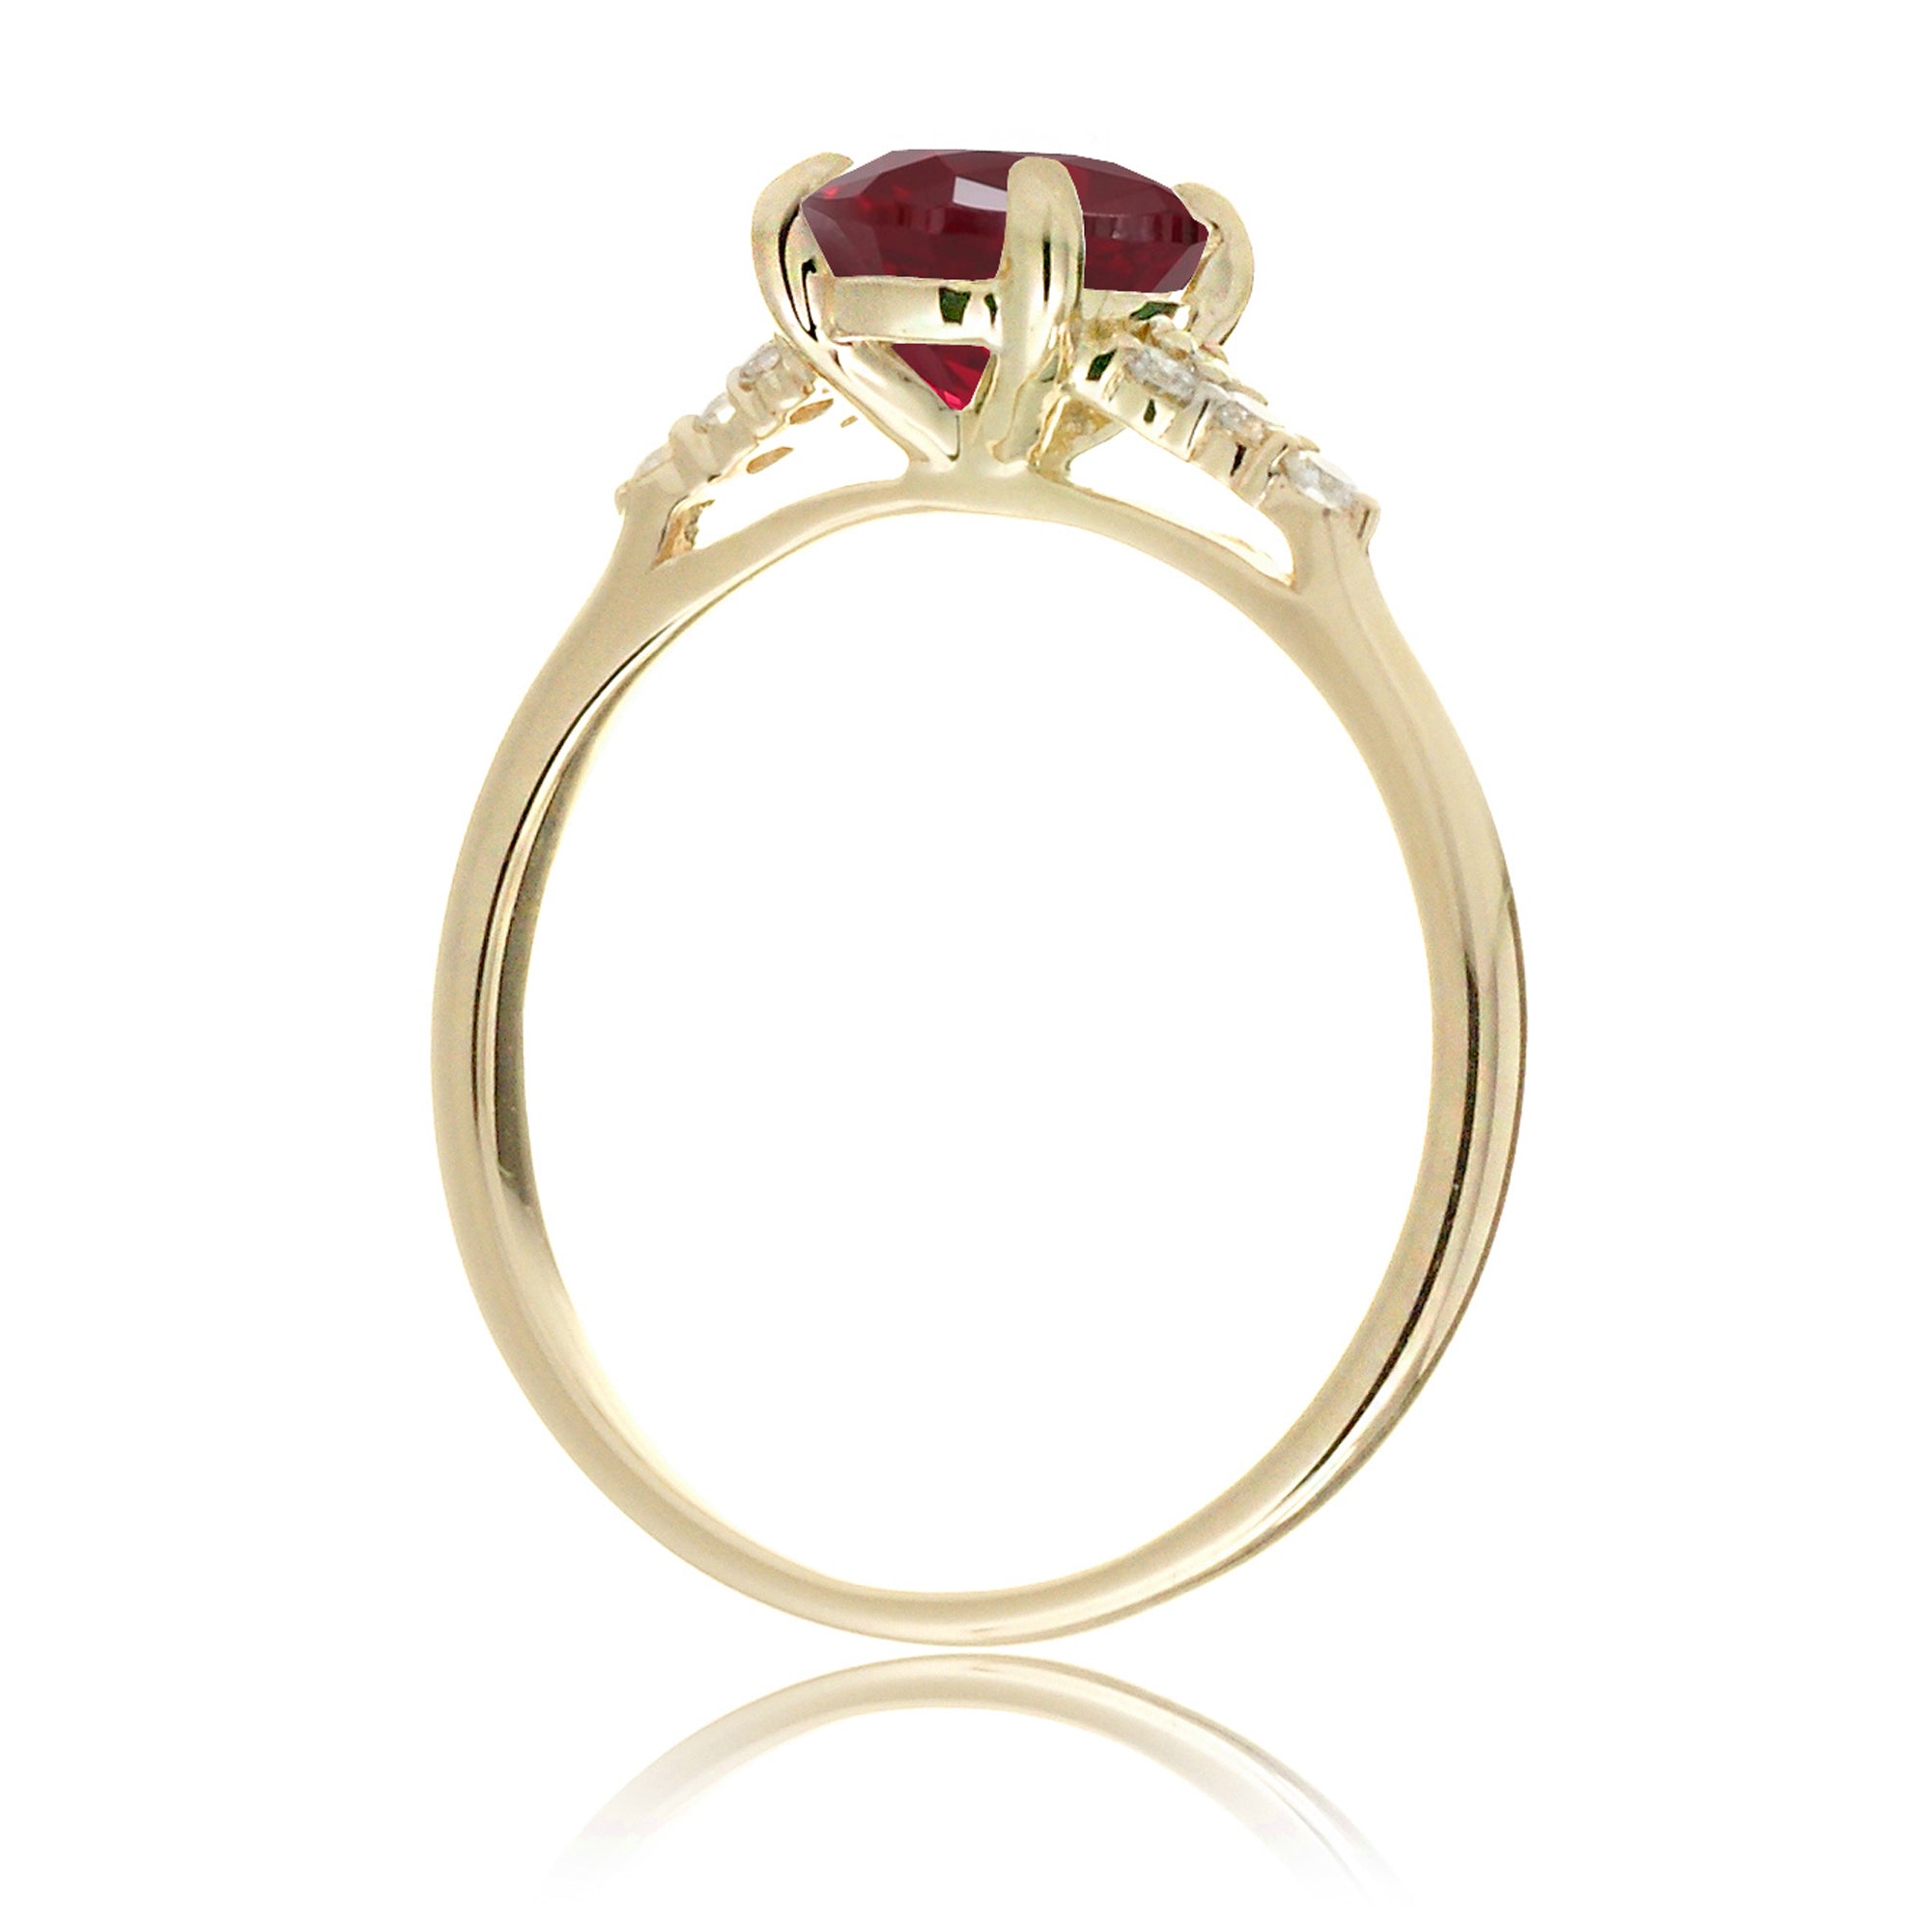 Ruby ring with princess cut and diamond accent in yellow gold